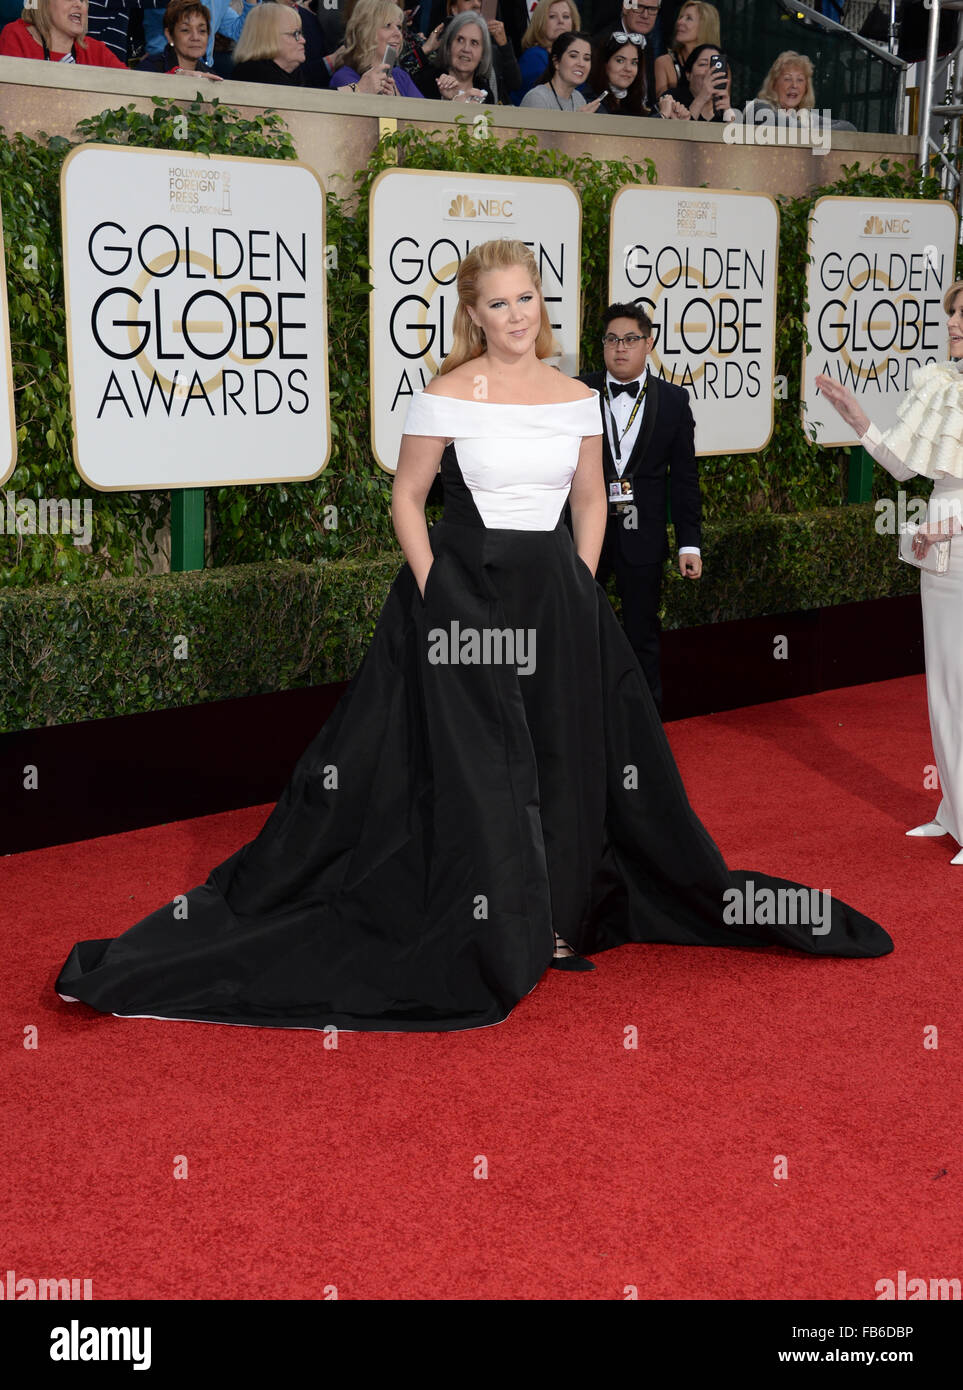 Los Angeles, California, USA. 10th January, 2016. Amy Schumer arrives at the Golden Globes, Los Angeles, CA Credit:  Sydney Alford/Alamy Live News Stock Photo